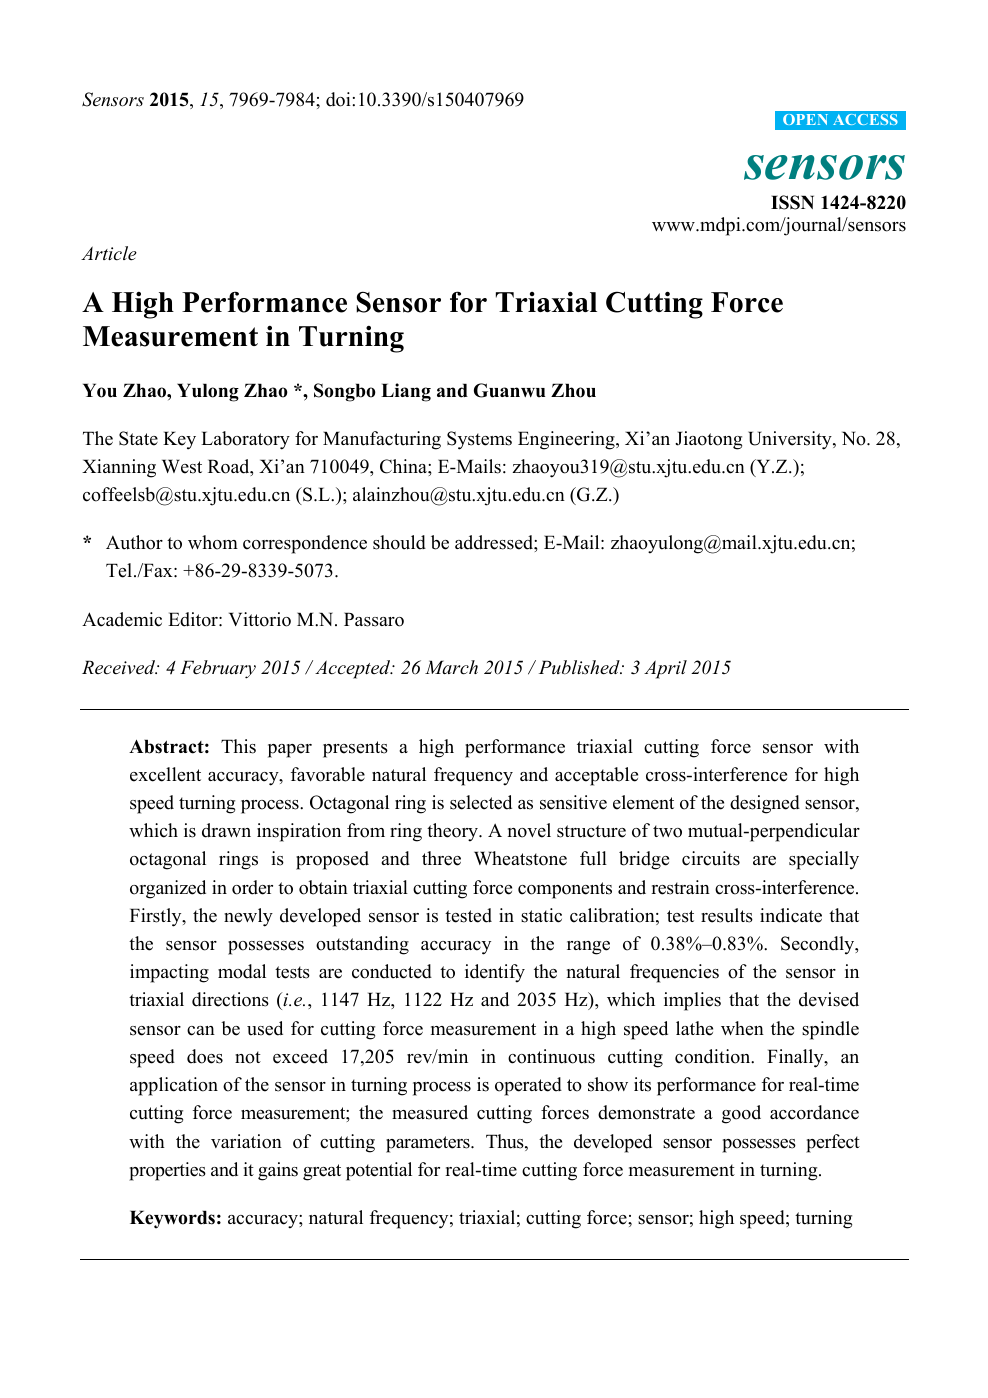 A High Performance Sensor For Triaxial Cutting Force Measurement In Turning Topic Of Research Paper In Mechanical Engineering Download Scholarly Article Pdf And Read For Free On Cyberleninka Open Science Hub